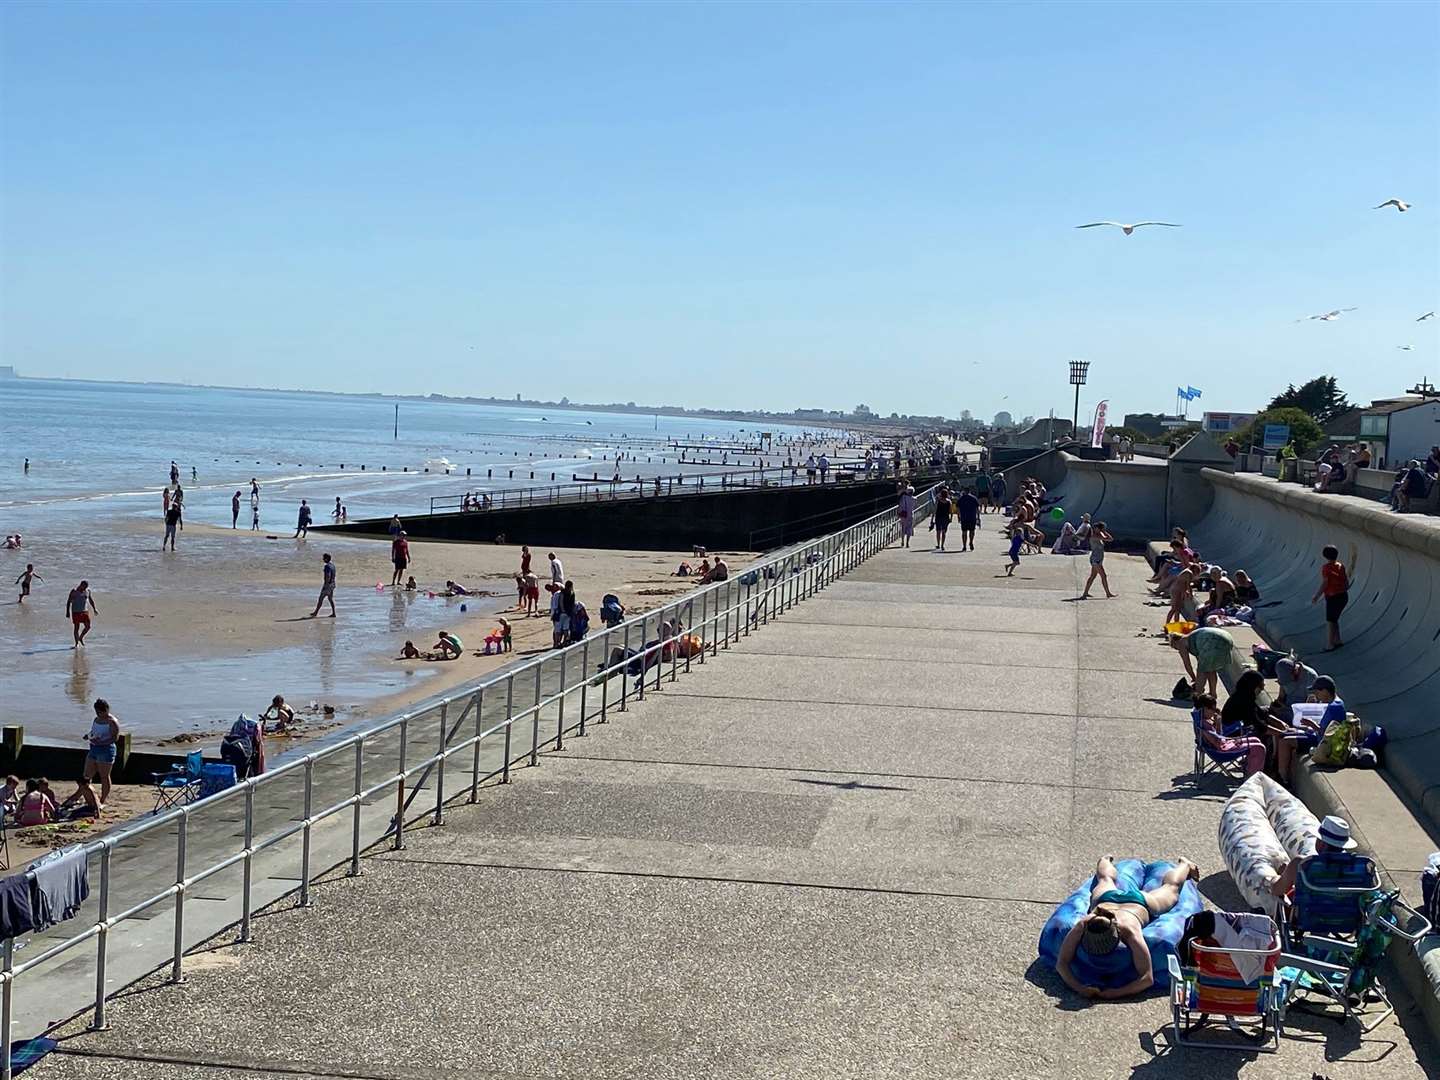 Beaches are expected to attract crowds over the coming days